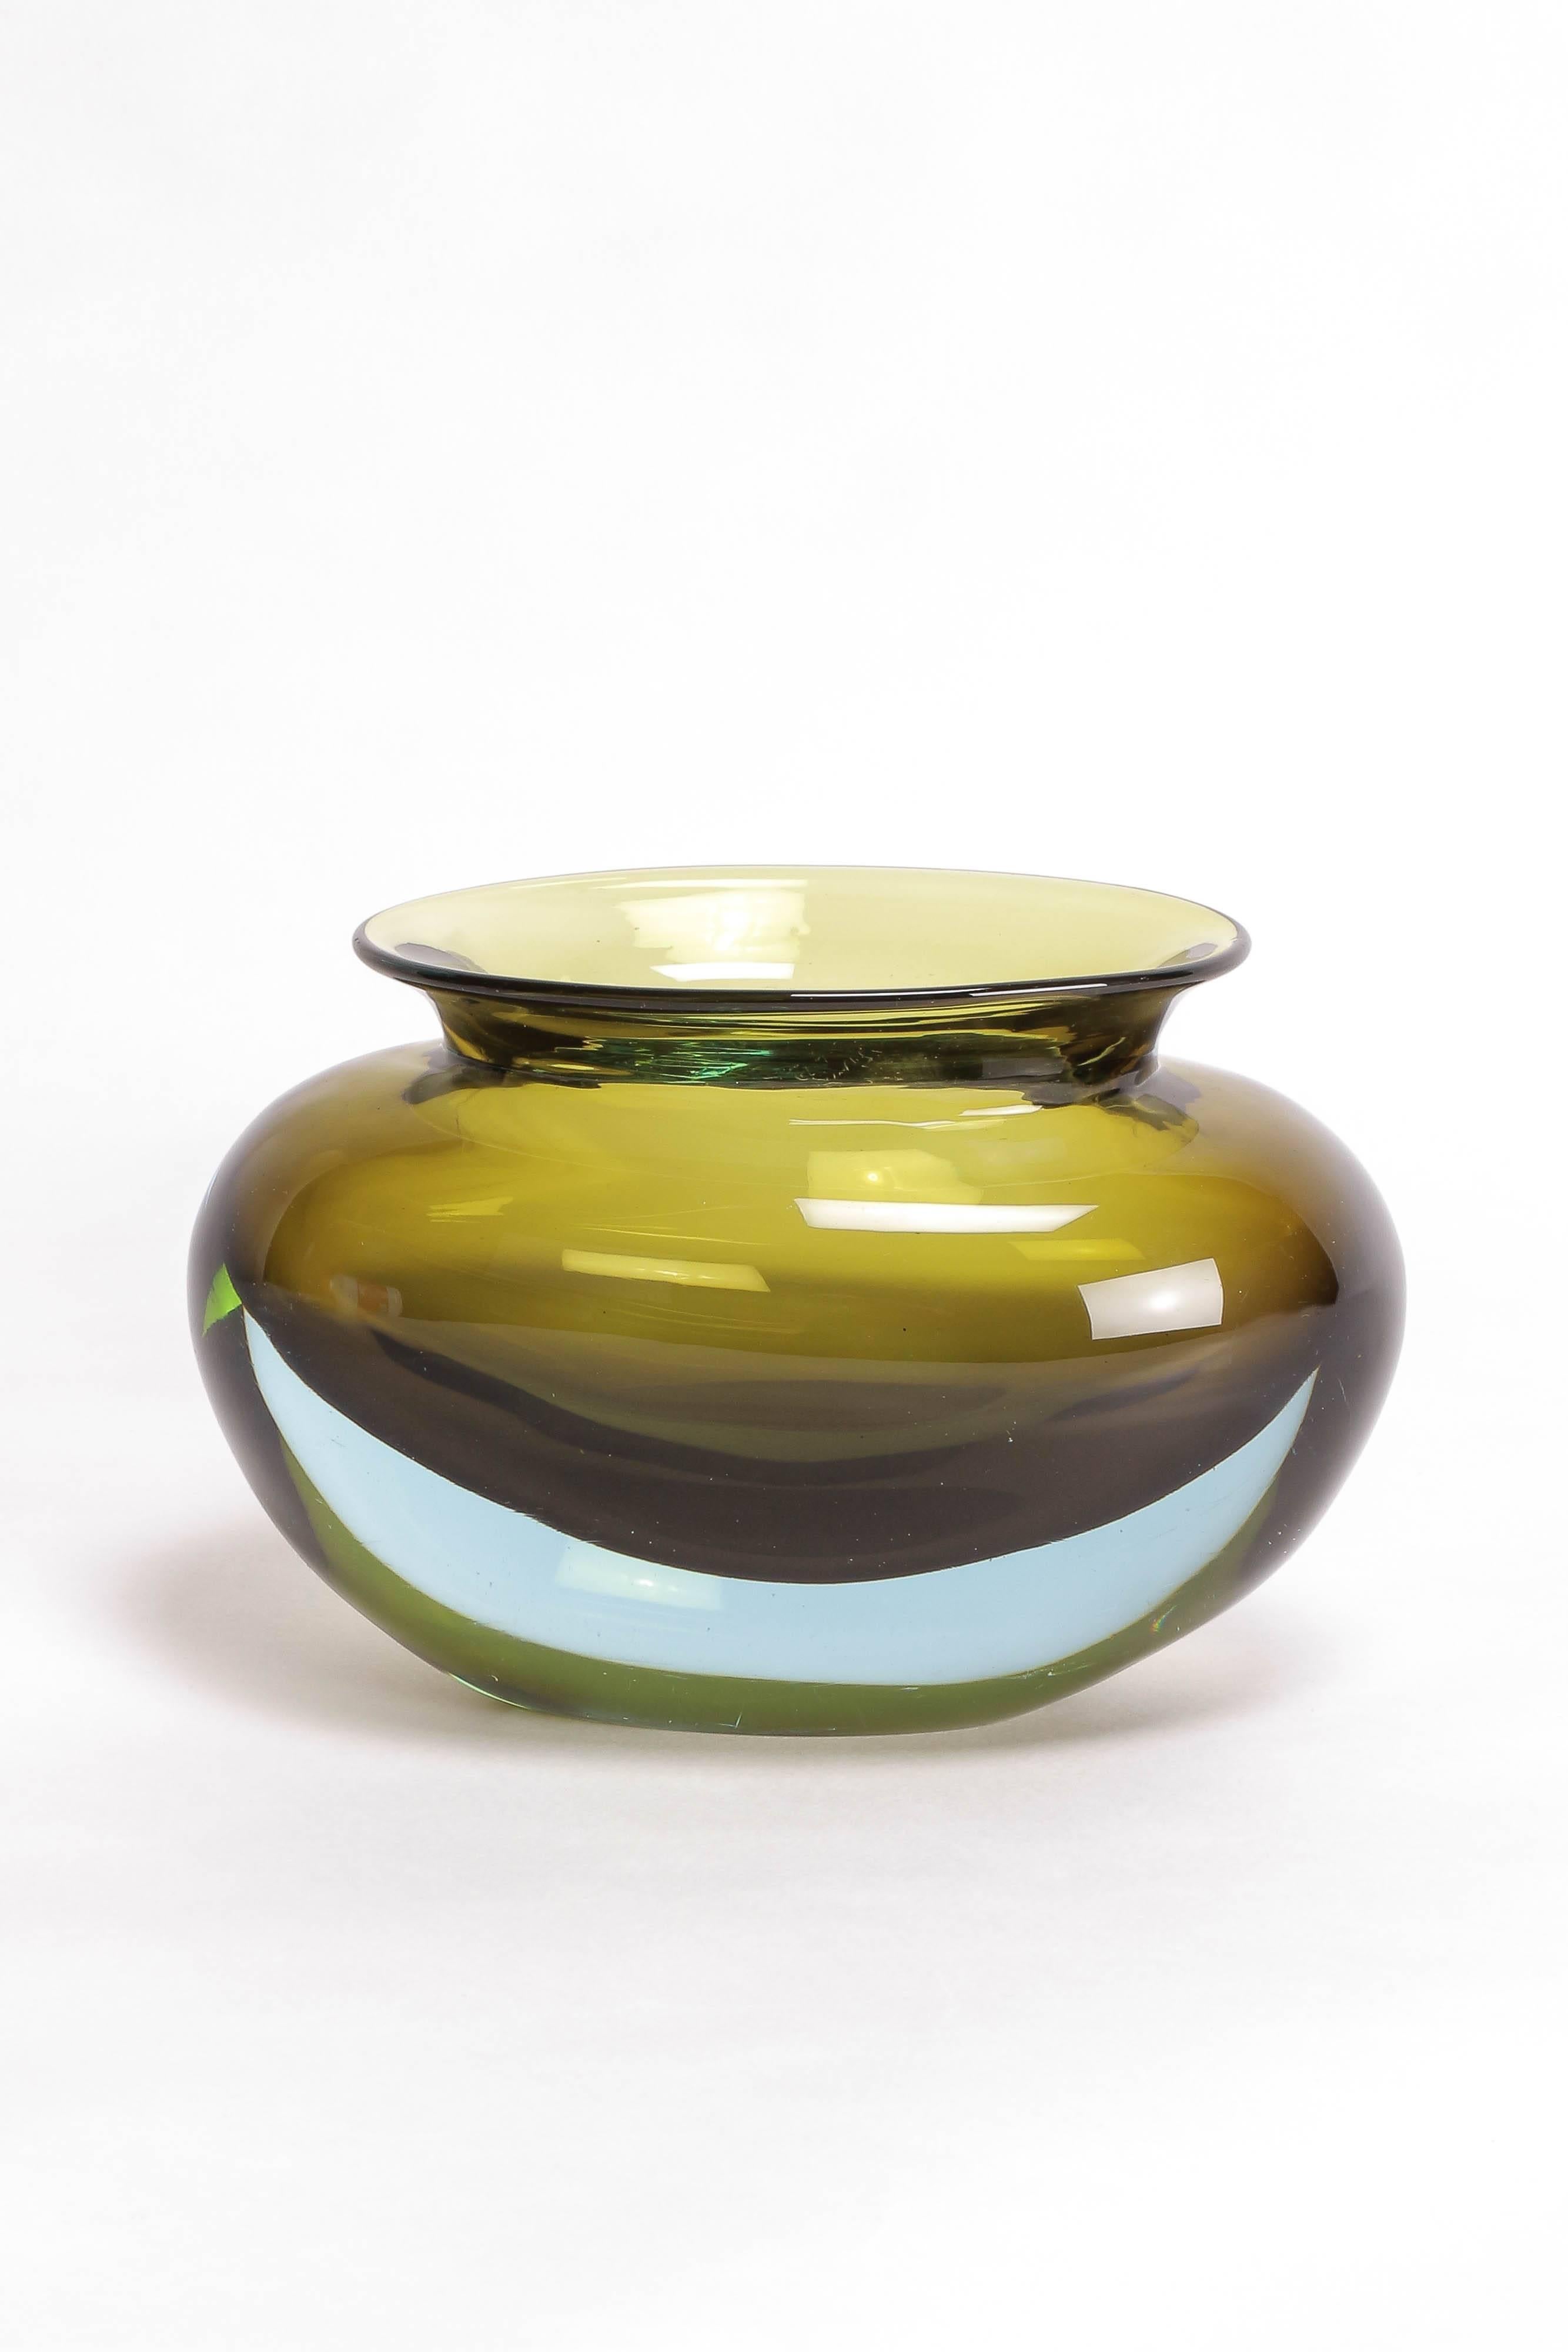 A stunning Murano vase by Flavio Poli, mouth-blown by the Seguso glass manufacture in 1963, color combination in "verde olive - acquamarina" a transparent olive green covered with transparent aquamarine, model number 12892. 

Literature: